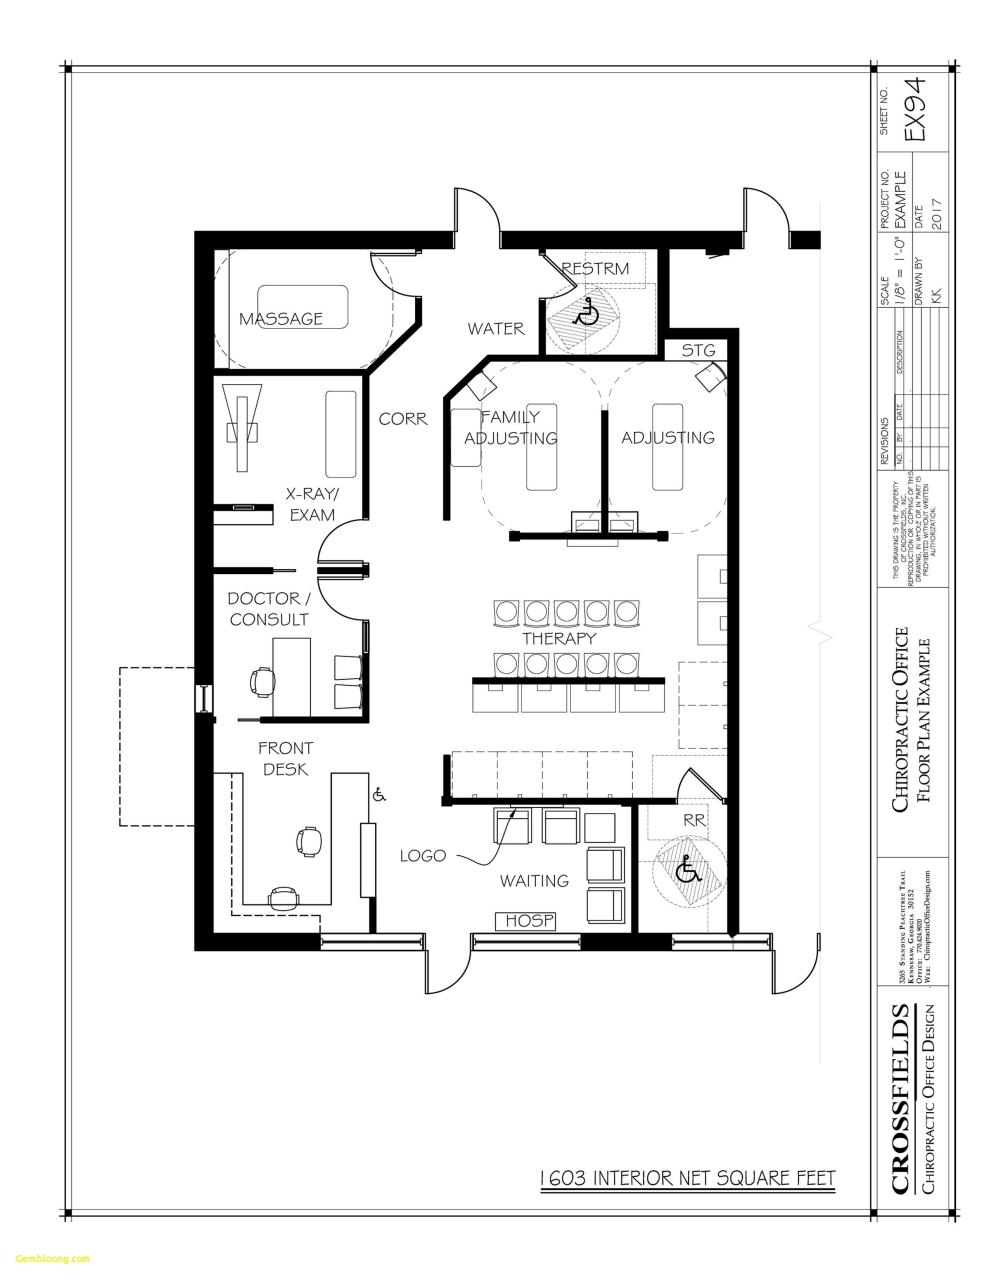 Free software to Draw House Plans 2020 Floor plan layout, Floor plan